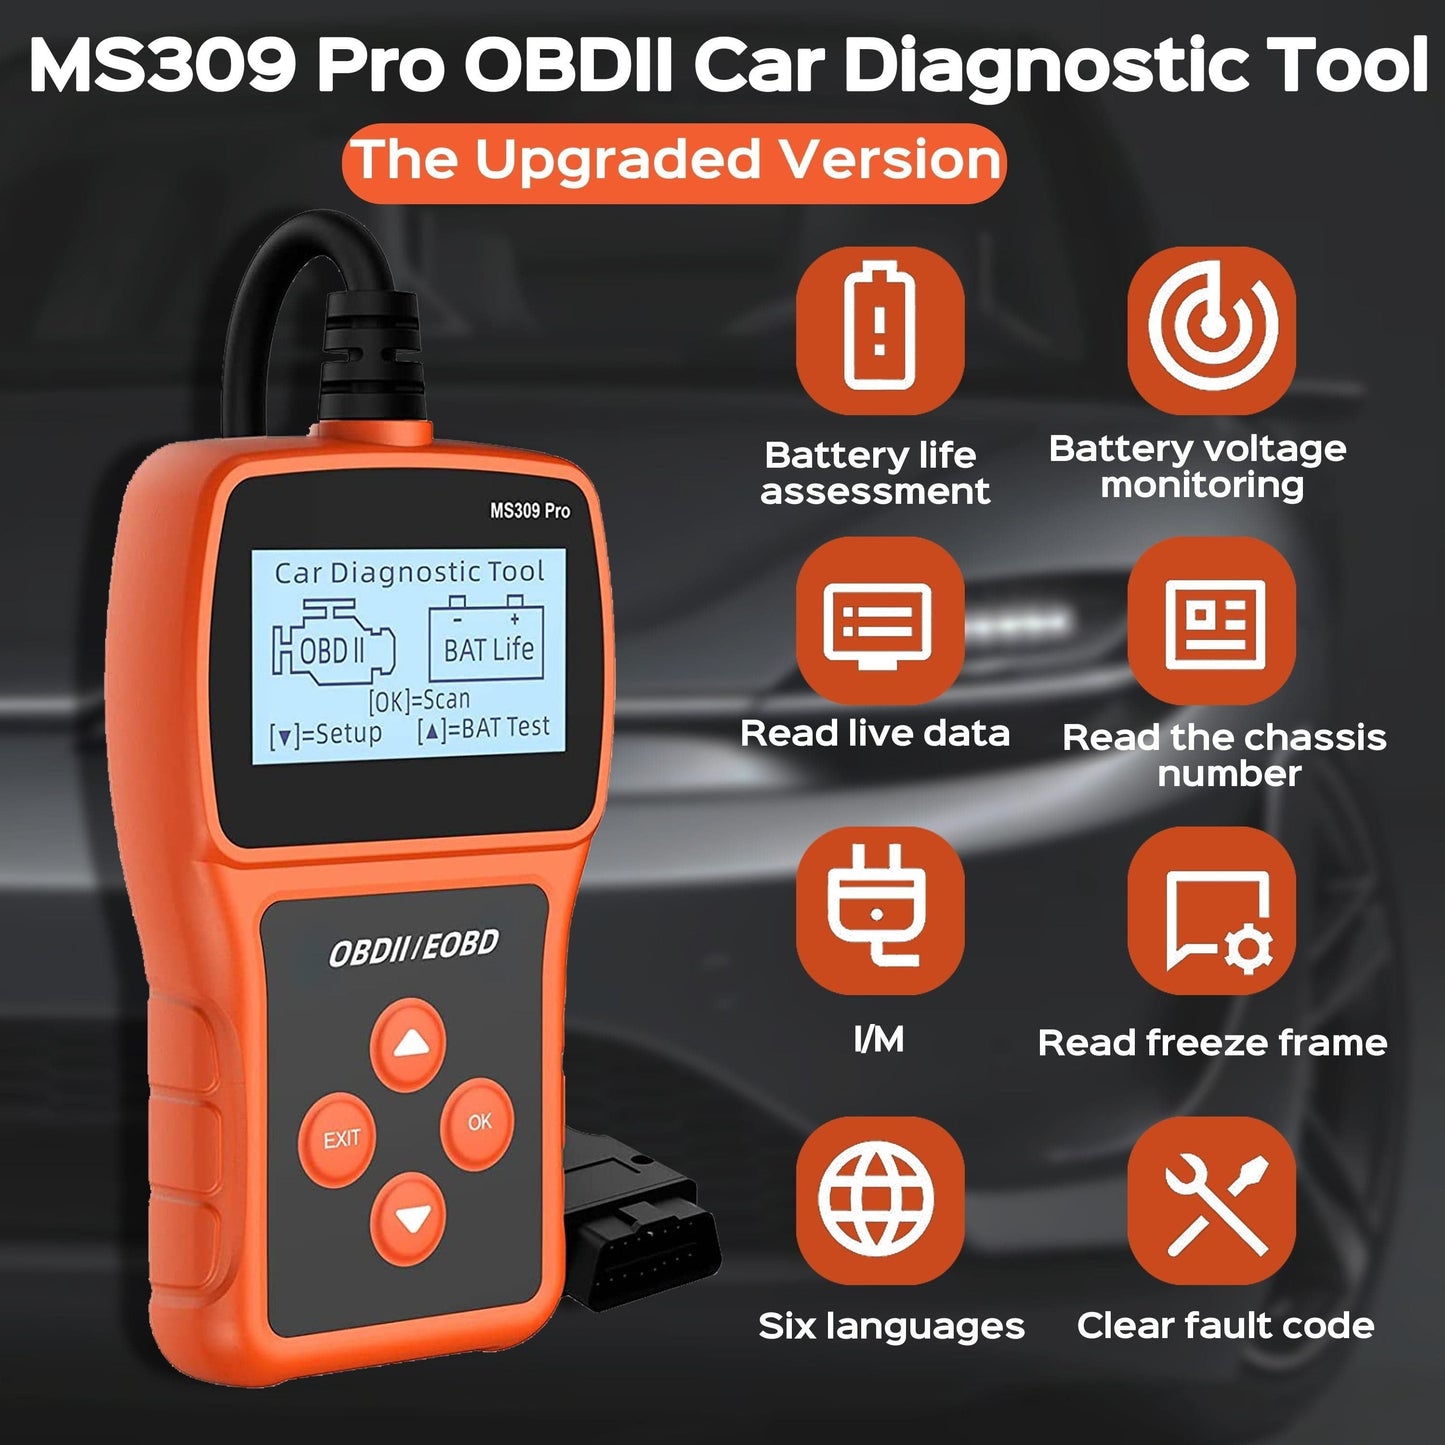 Auto OBD2 Scanner: Check Your Car's Health & Battery With This Diagnostic Scan Tool!